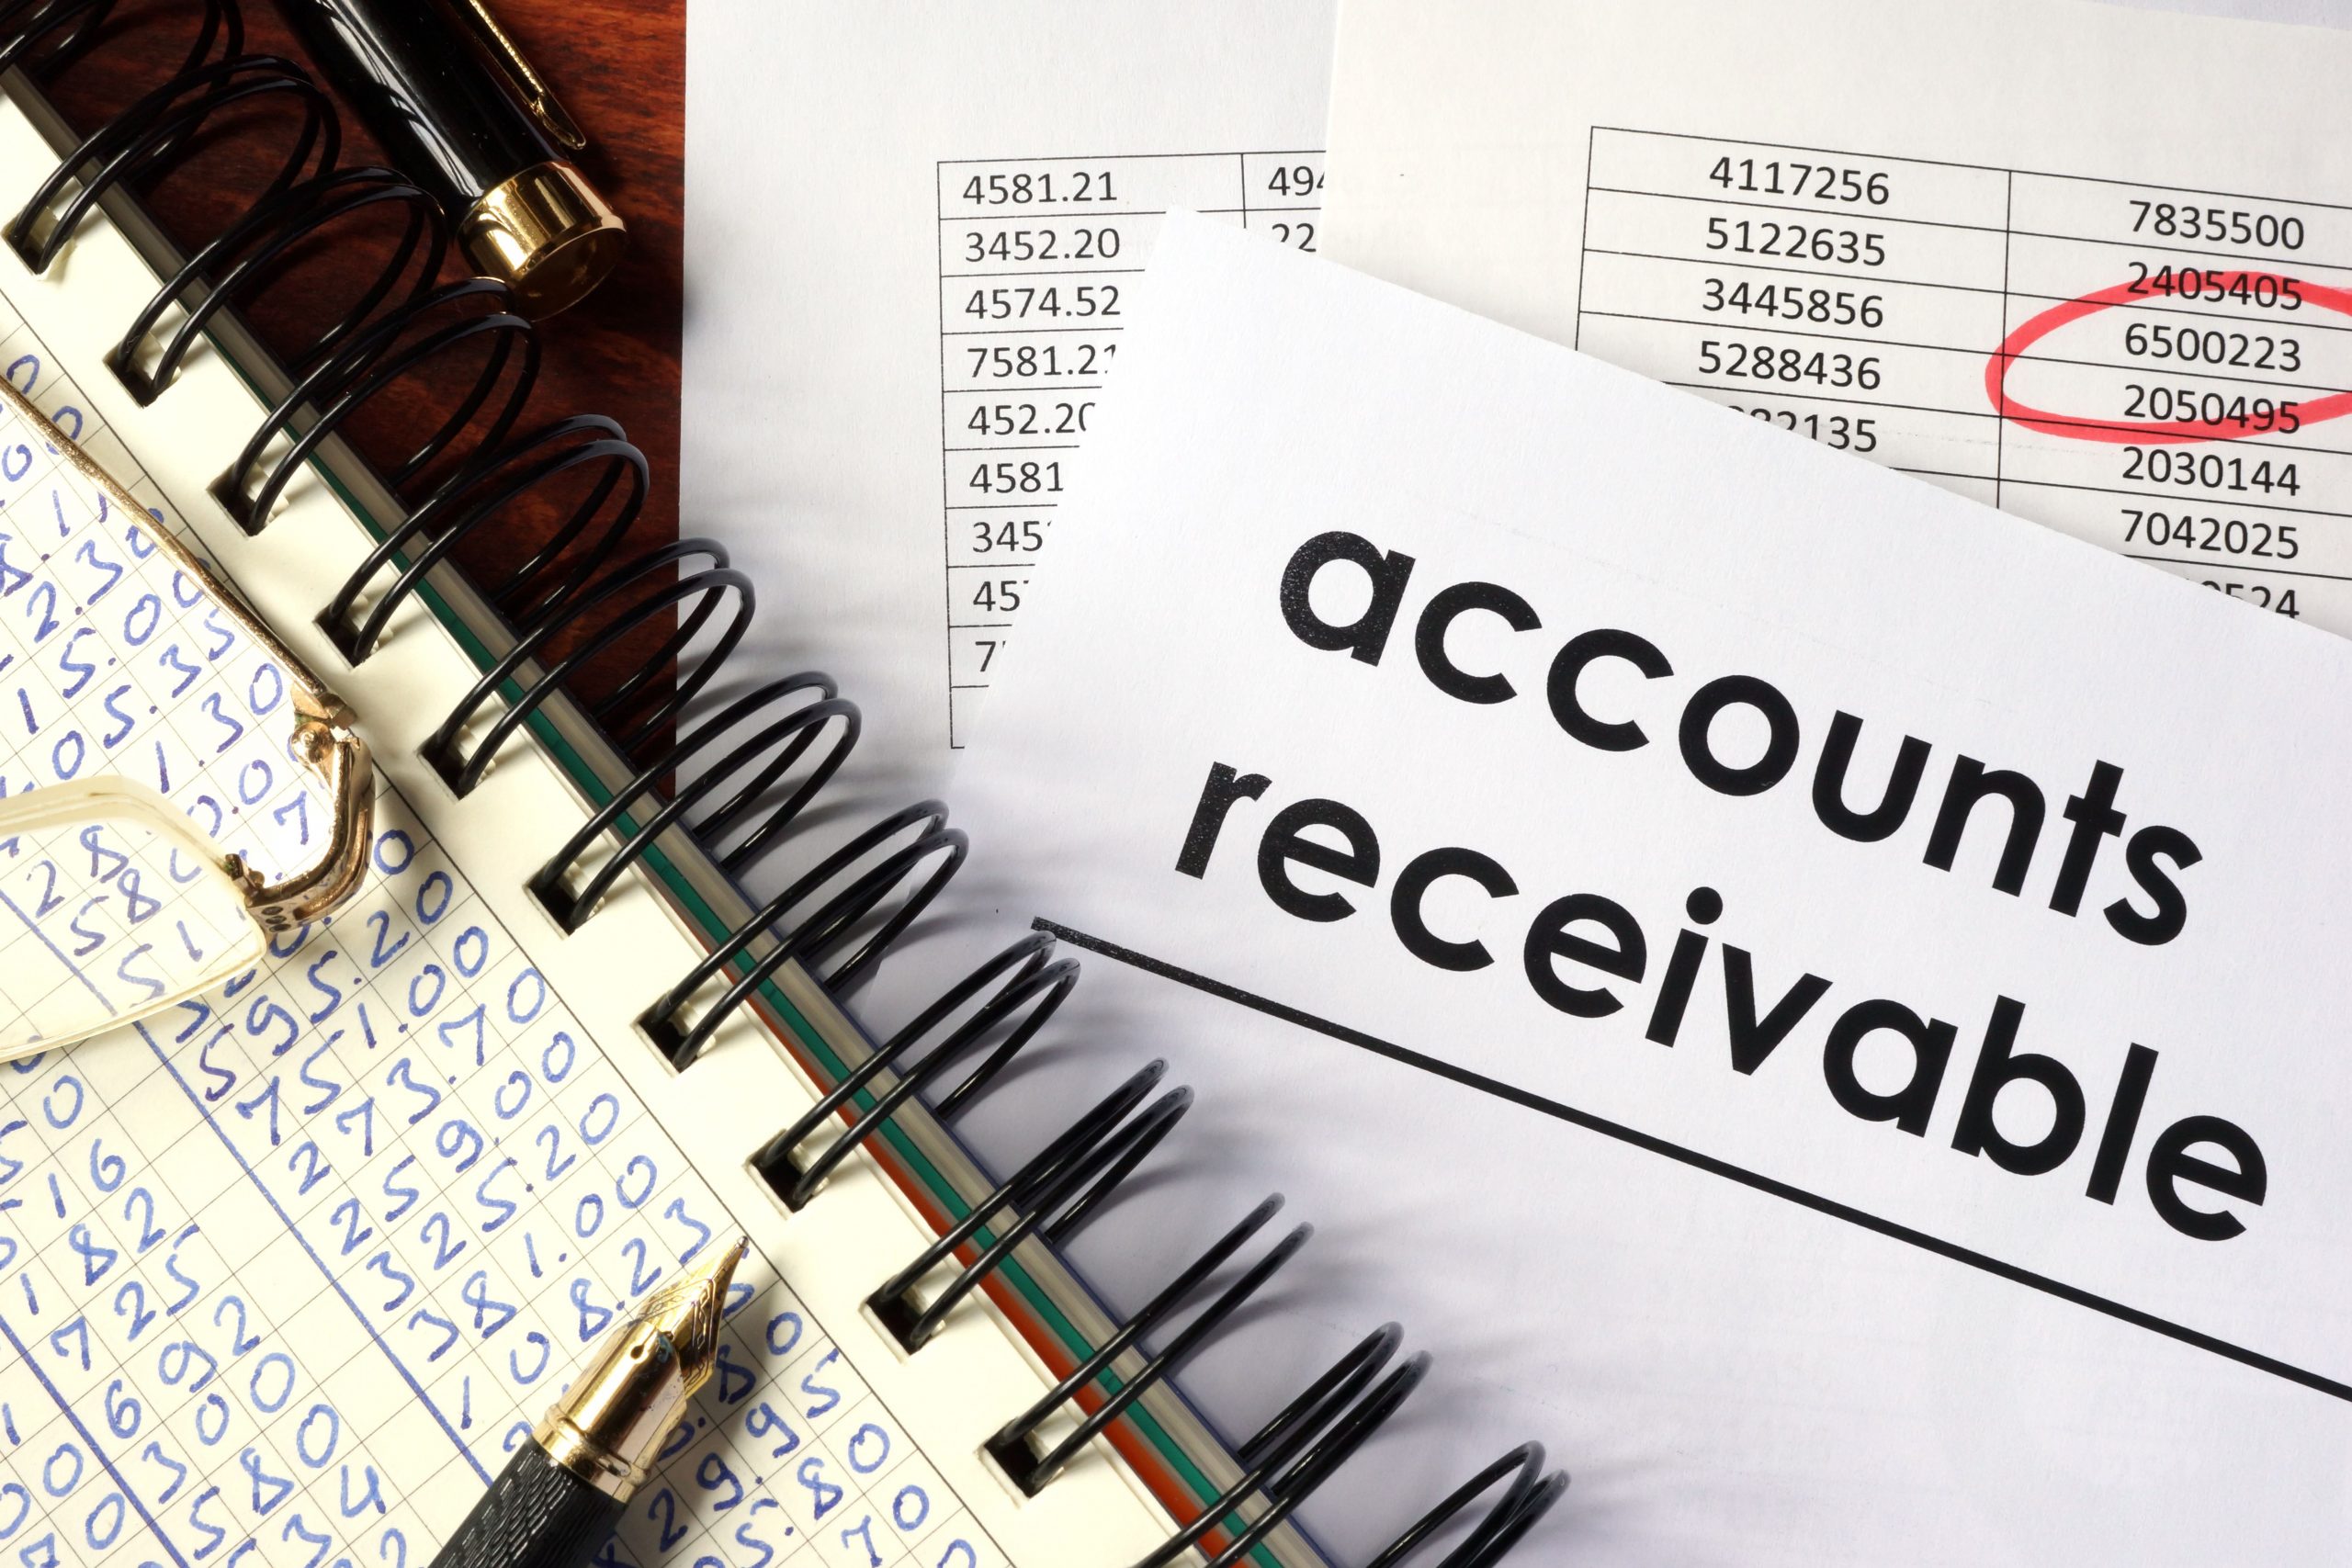 TRAINING ONLINE BEST PRACTICE ACCOUNT PAYABLE AND ACCOUNT RECEIVABLE MANAGEMENT